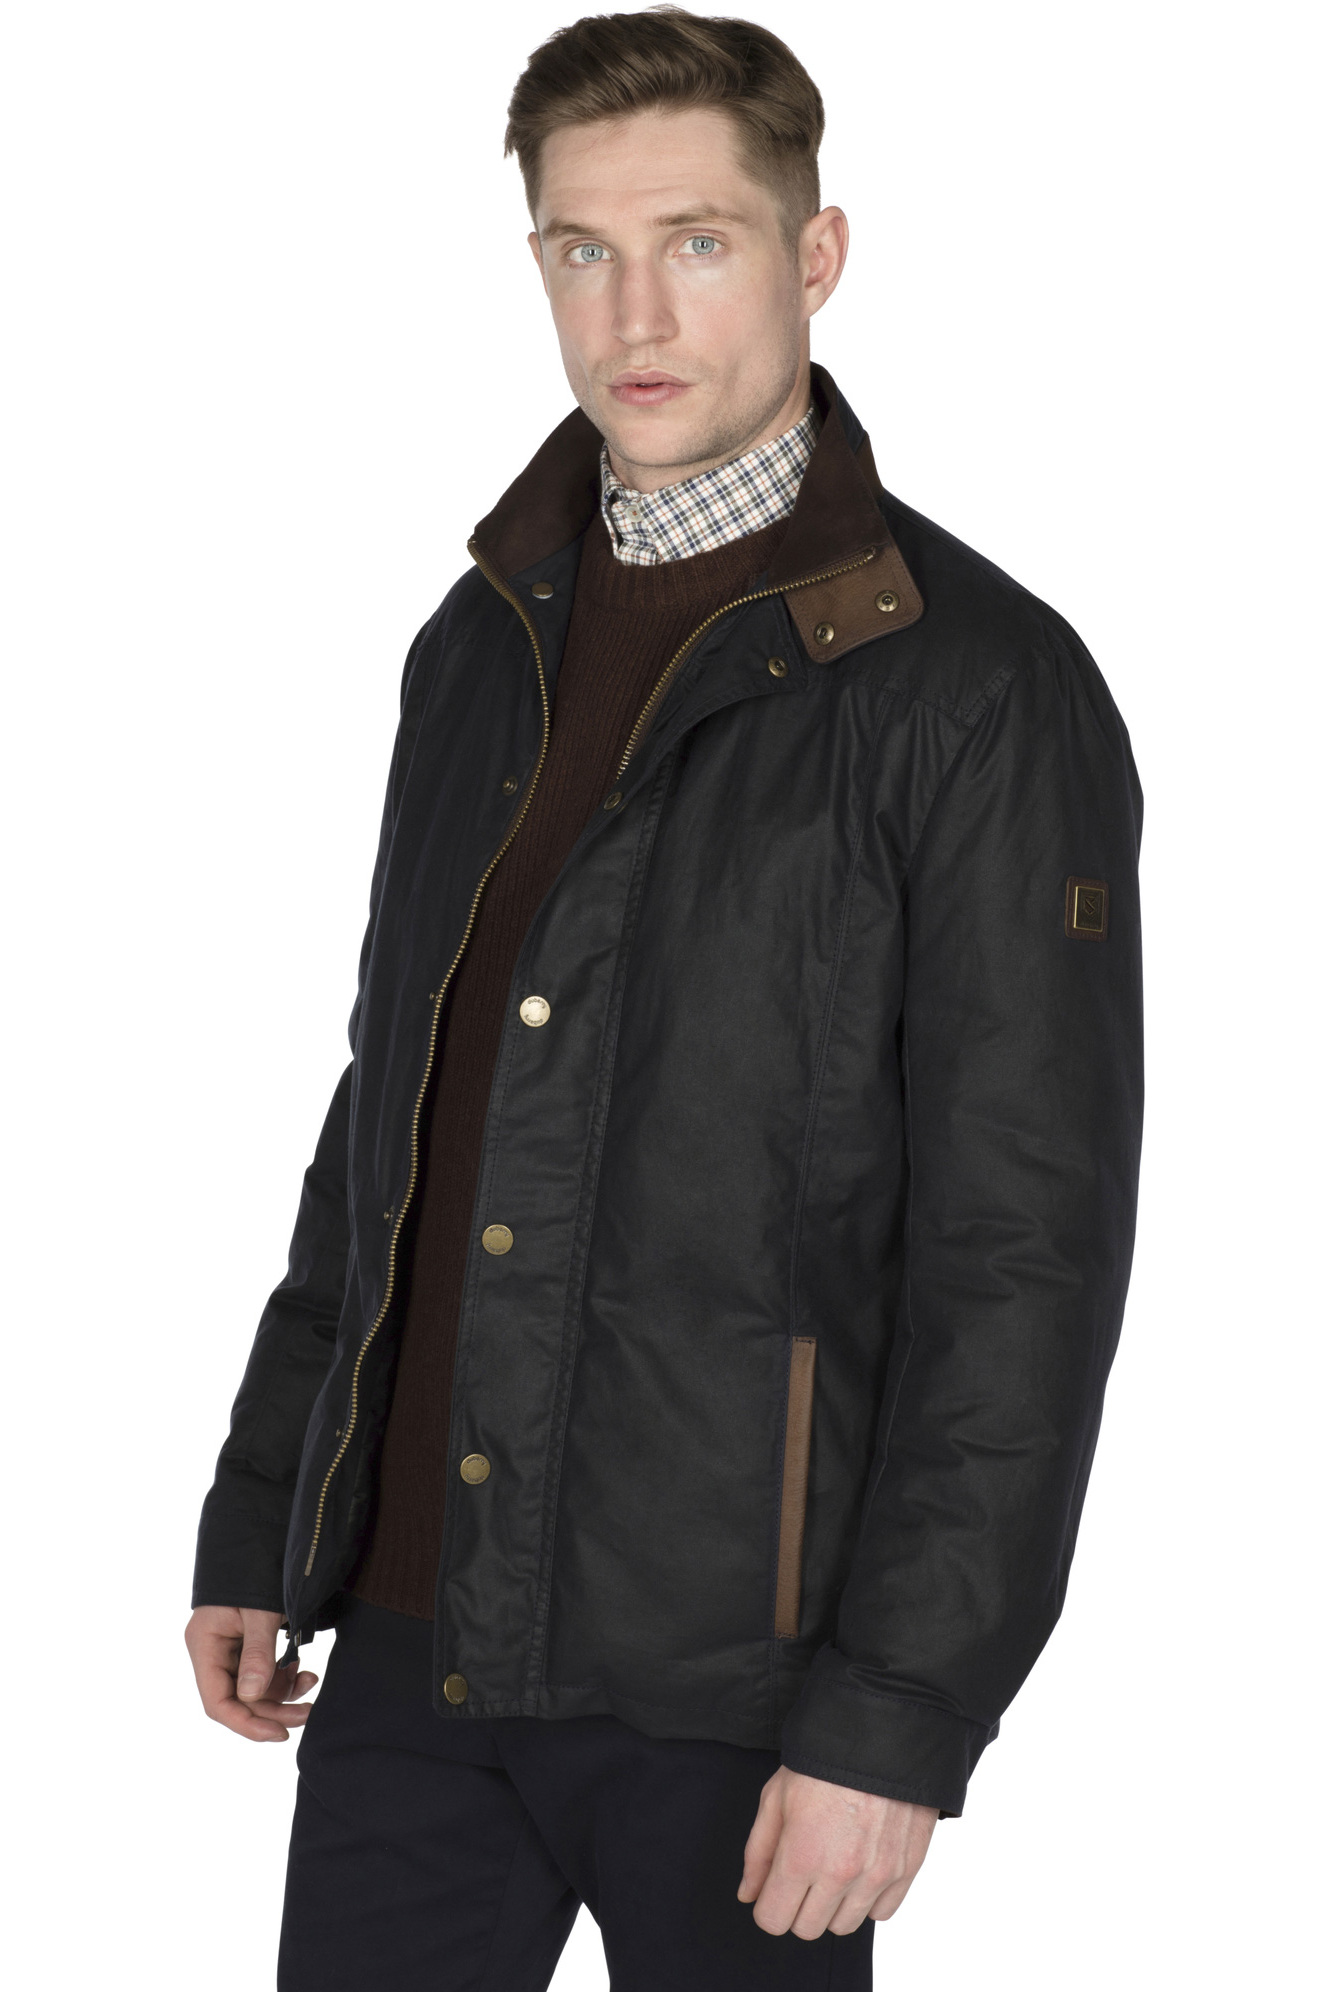 Dubarry Mens Carrickgergus Jacket | & Gilets | The Drill Shed | The Drillshed